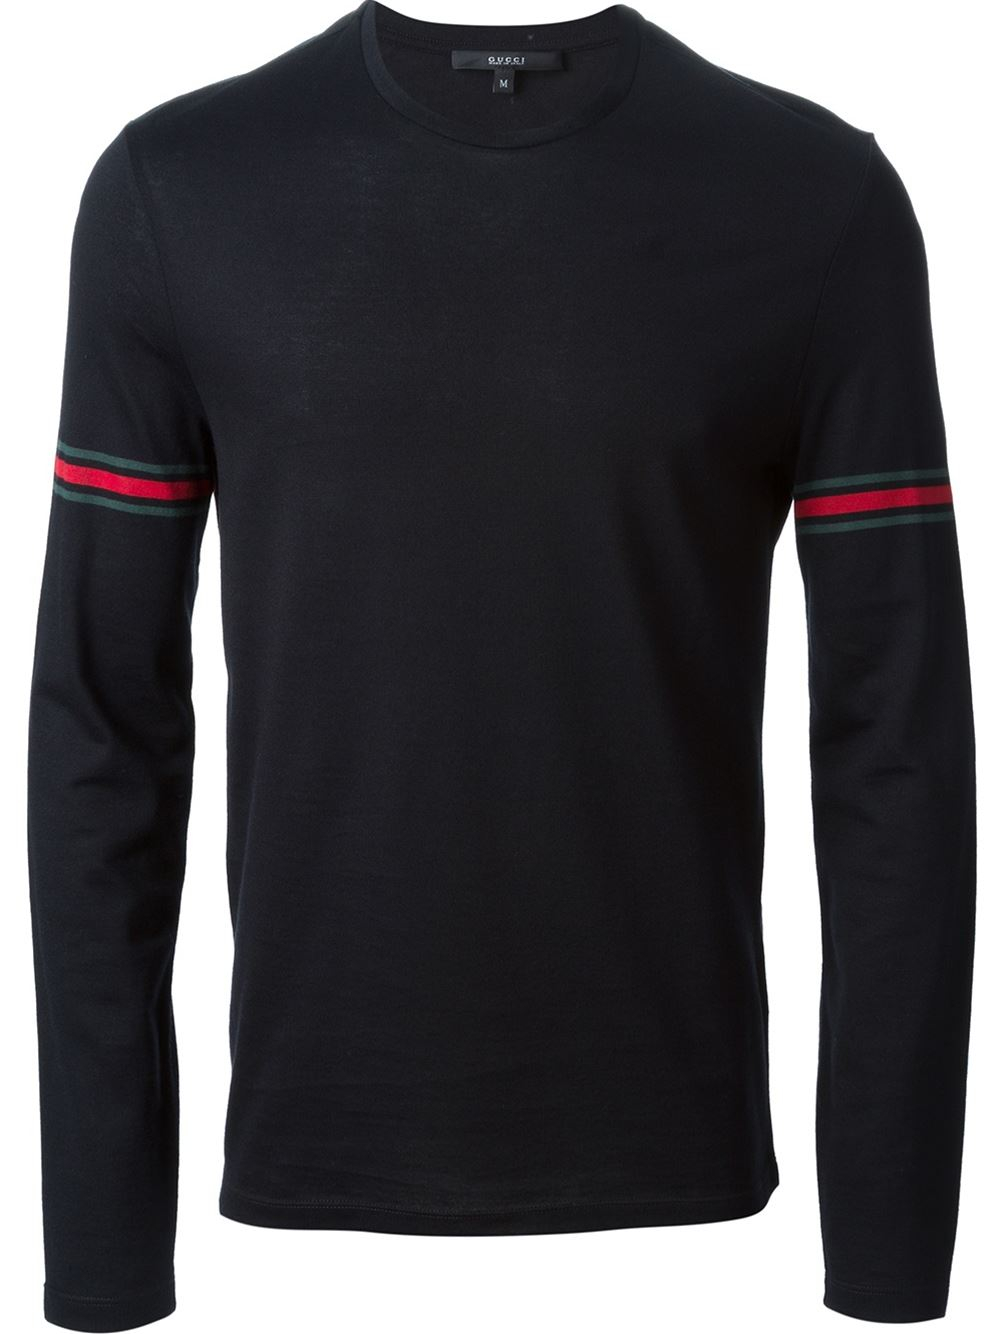 Lyst - Gucci Long Sleeve T-Shirt in Black for Men